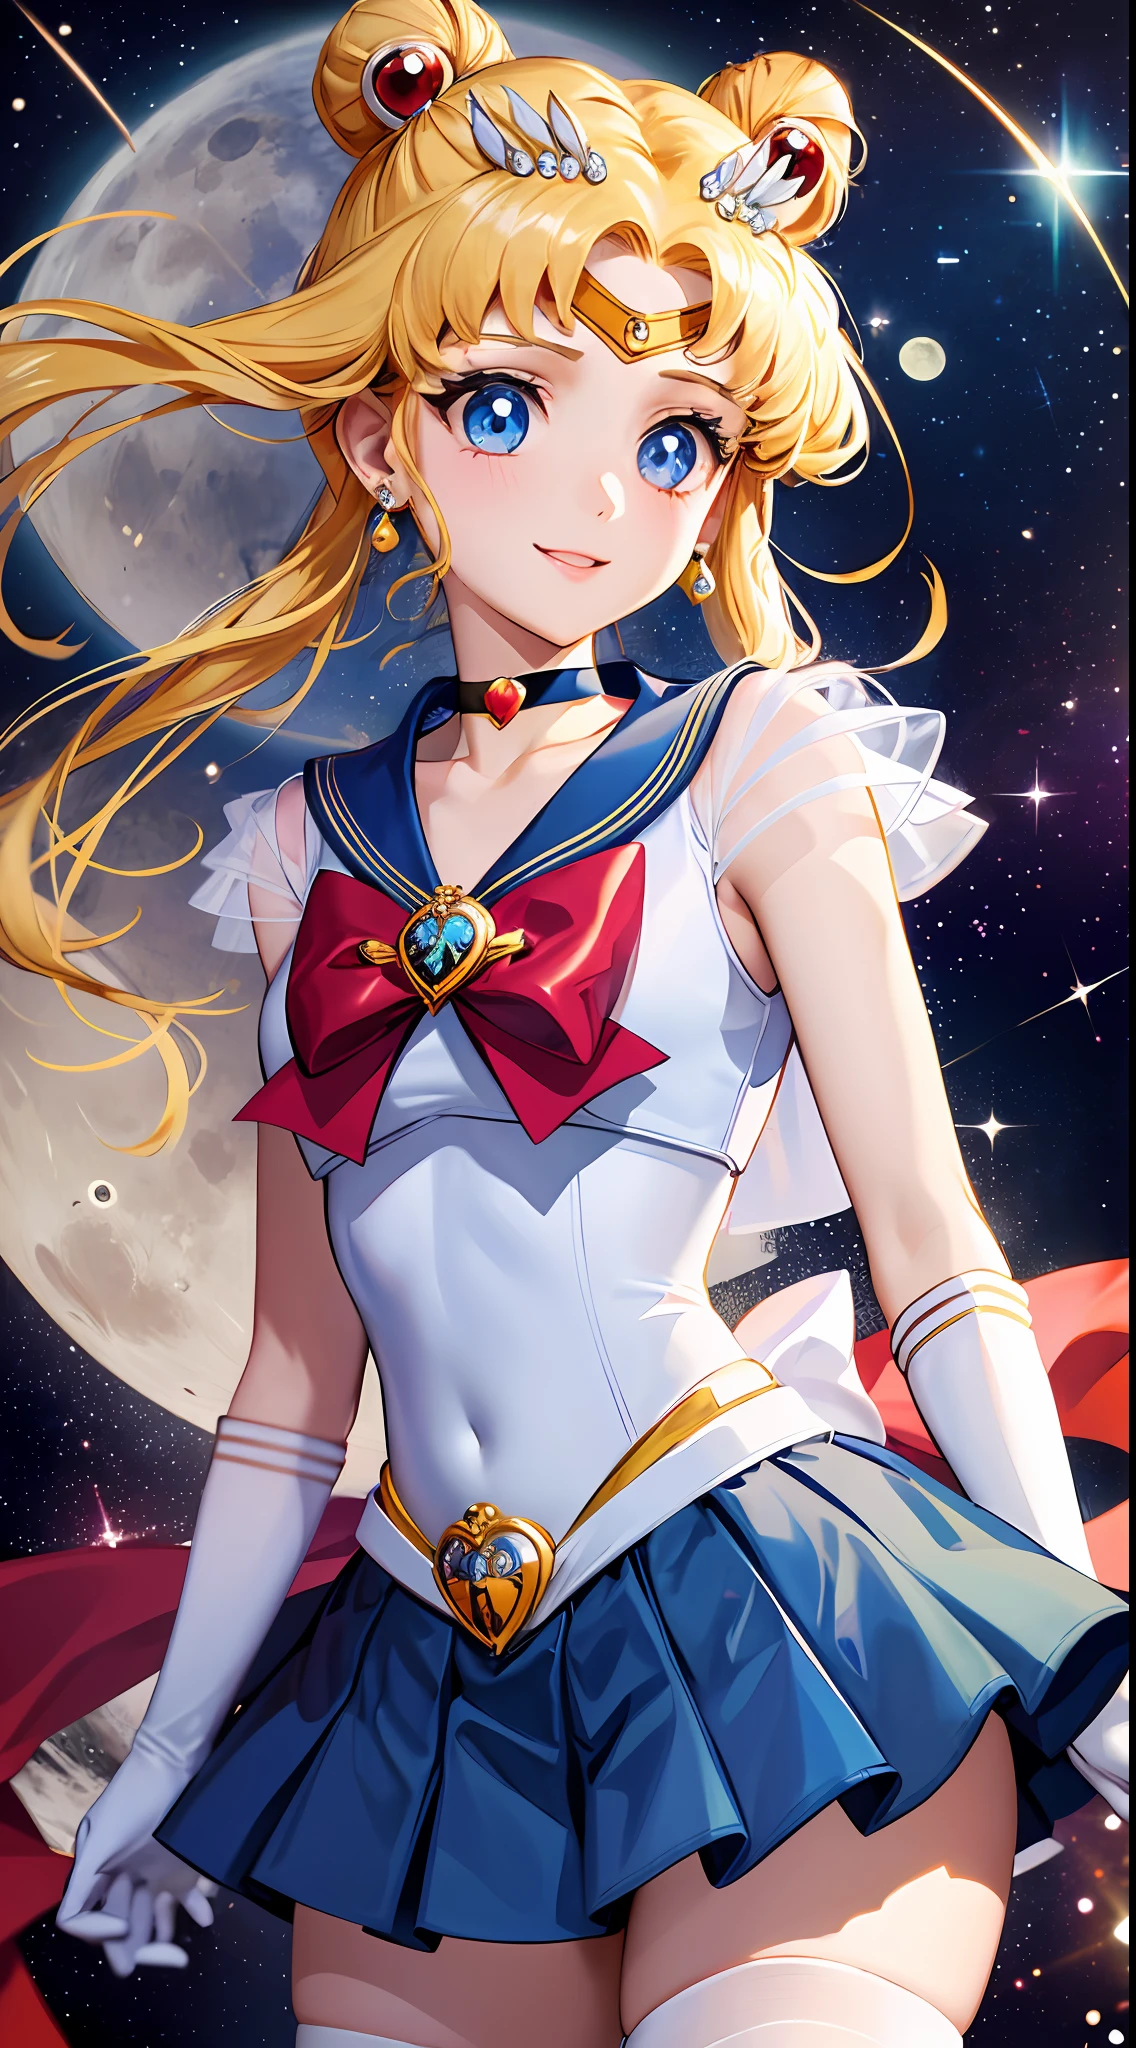 Masterpiece, Best Quality, Hi-Res, Moon 1, 1 Girl, Solo, Sailor Senshi Uniform, Sailor Moon, Usagi Tsukino, Blonde, Magical Girl, Blue Eyes, White Panties, Red Scarf, Elbow Gloves, Tiara, Blue Skirt, Pleated Skirt, Mini Skirt, Choker, White Gloves, Jewelry, Earrings, Smile, Background Is Space (Excellent Detail, Excellent Lighting, Wide Angle), skirt lift, show panties,